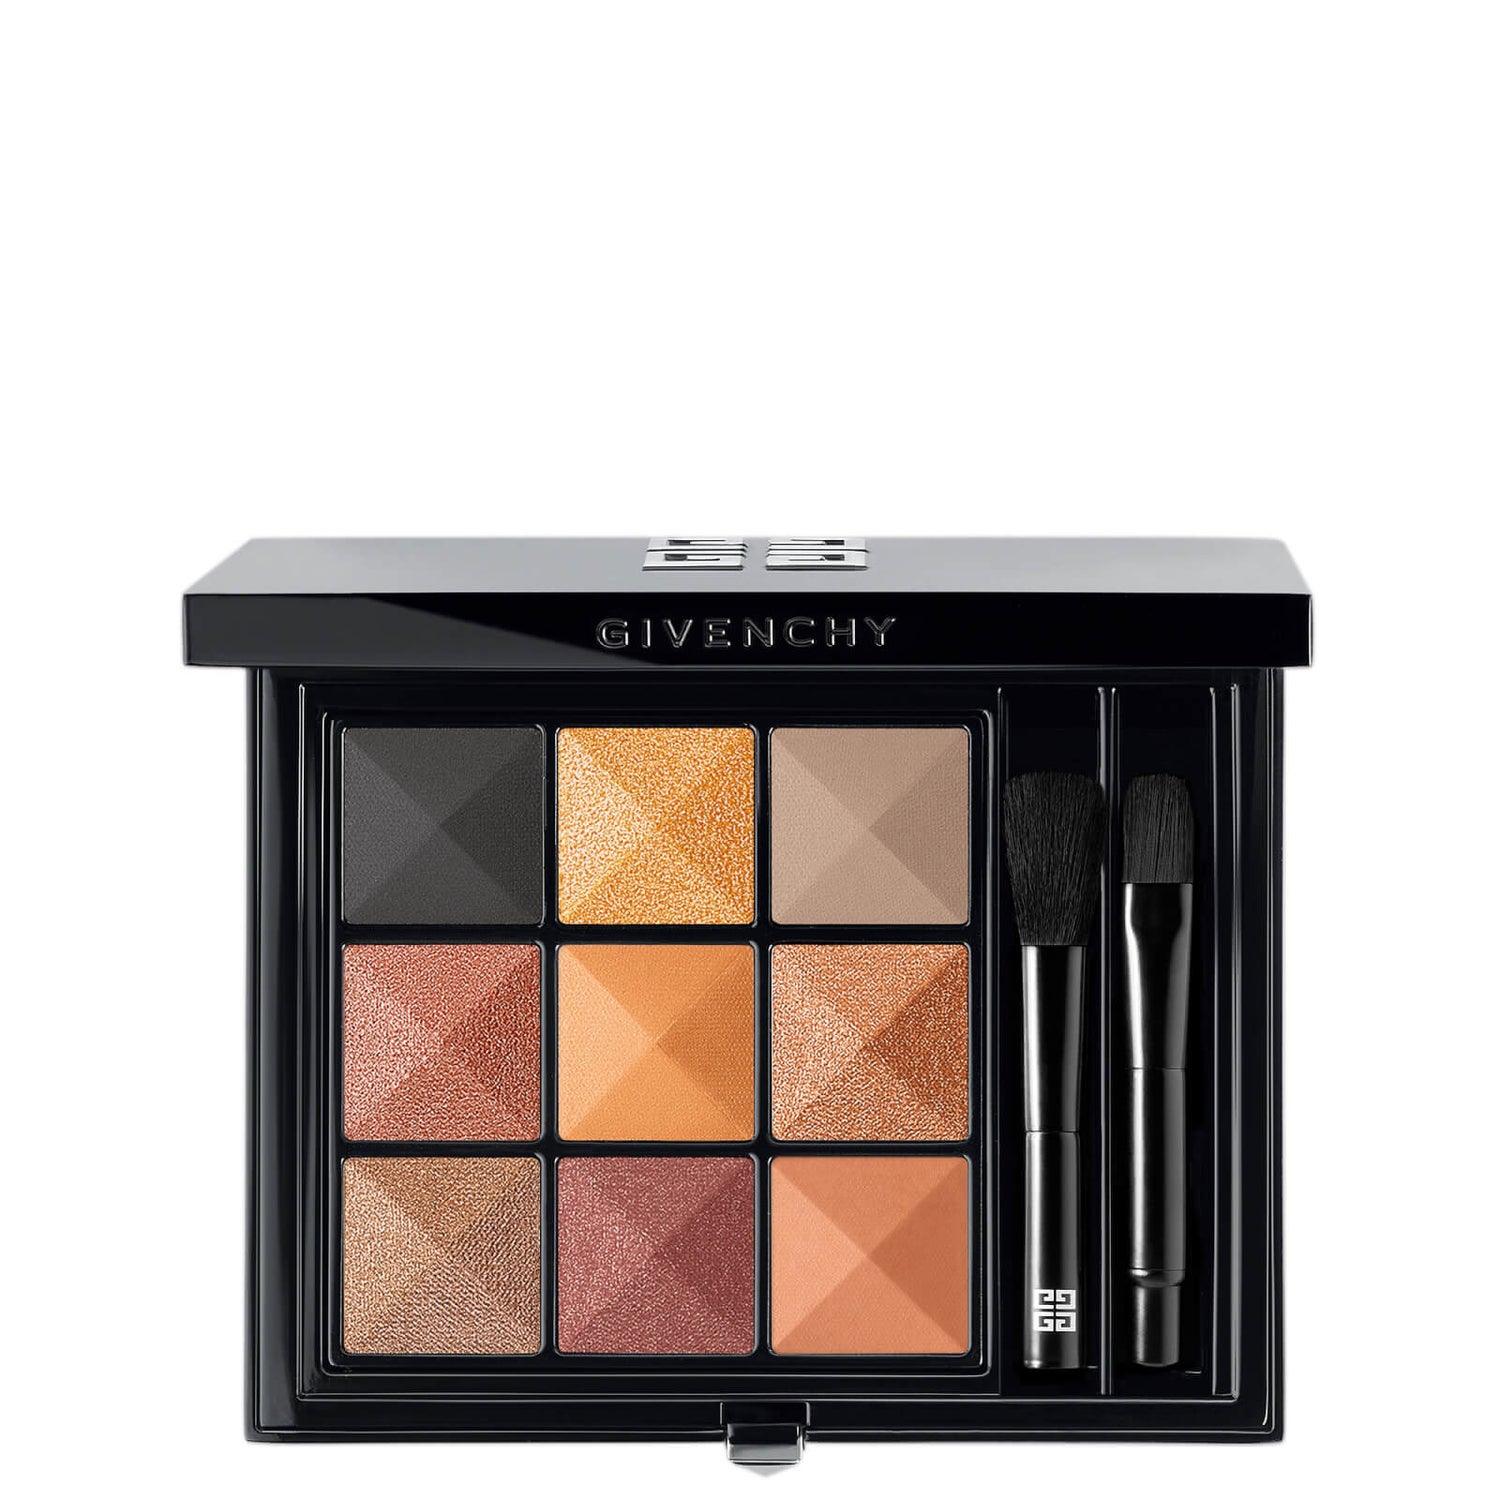 Givenchy Le 9 Multi-Finish Eyeshadows Palette 8g (Various Options)